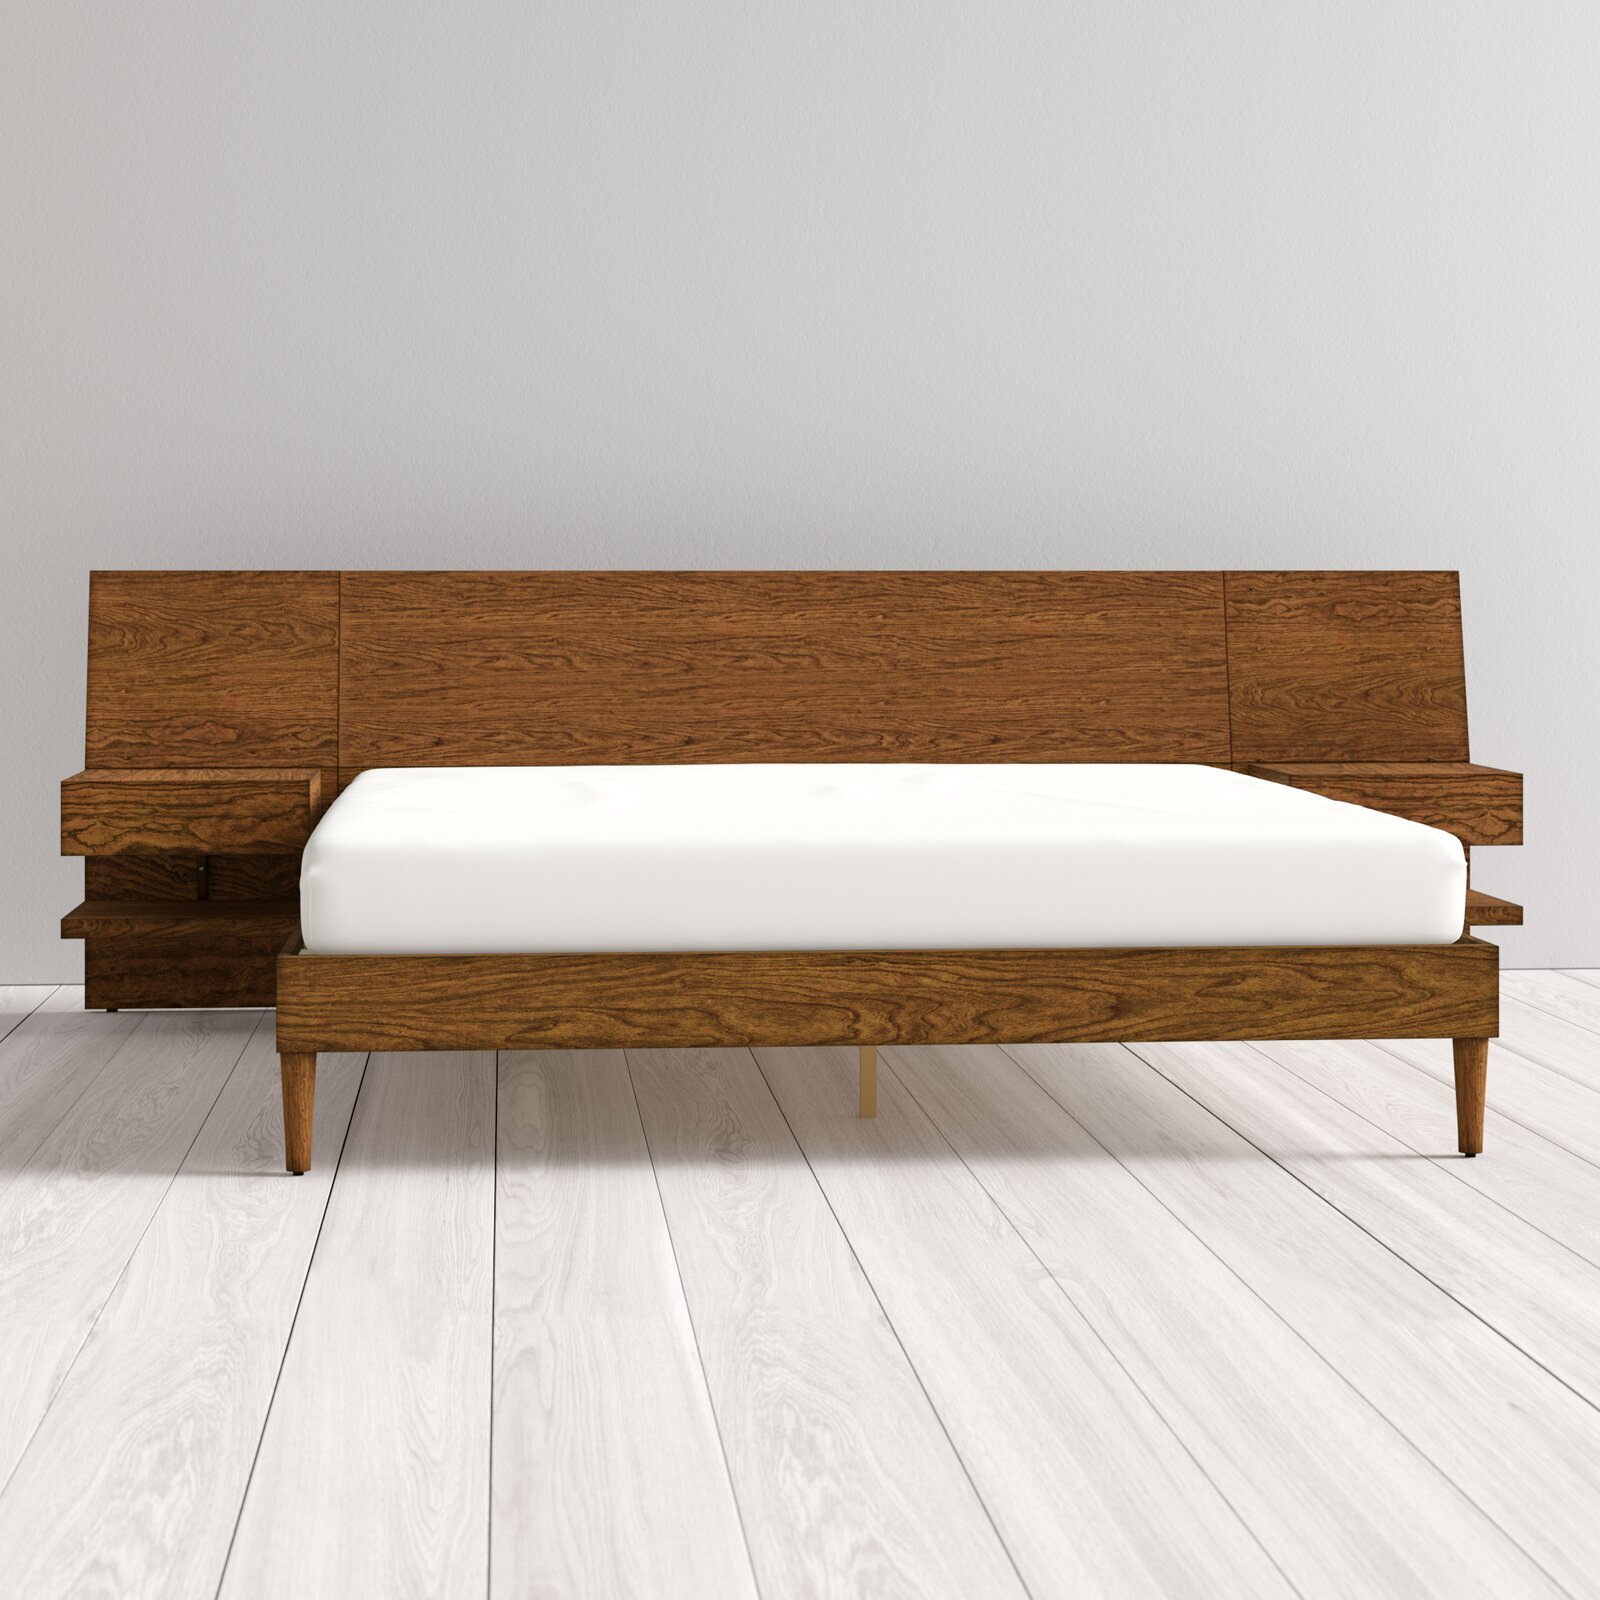 Wooden T frame Headboard with Shelves and Nightstands